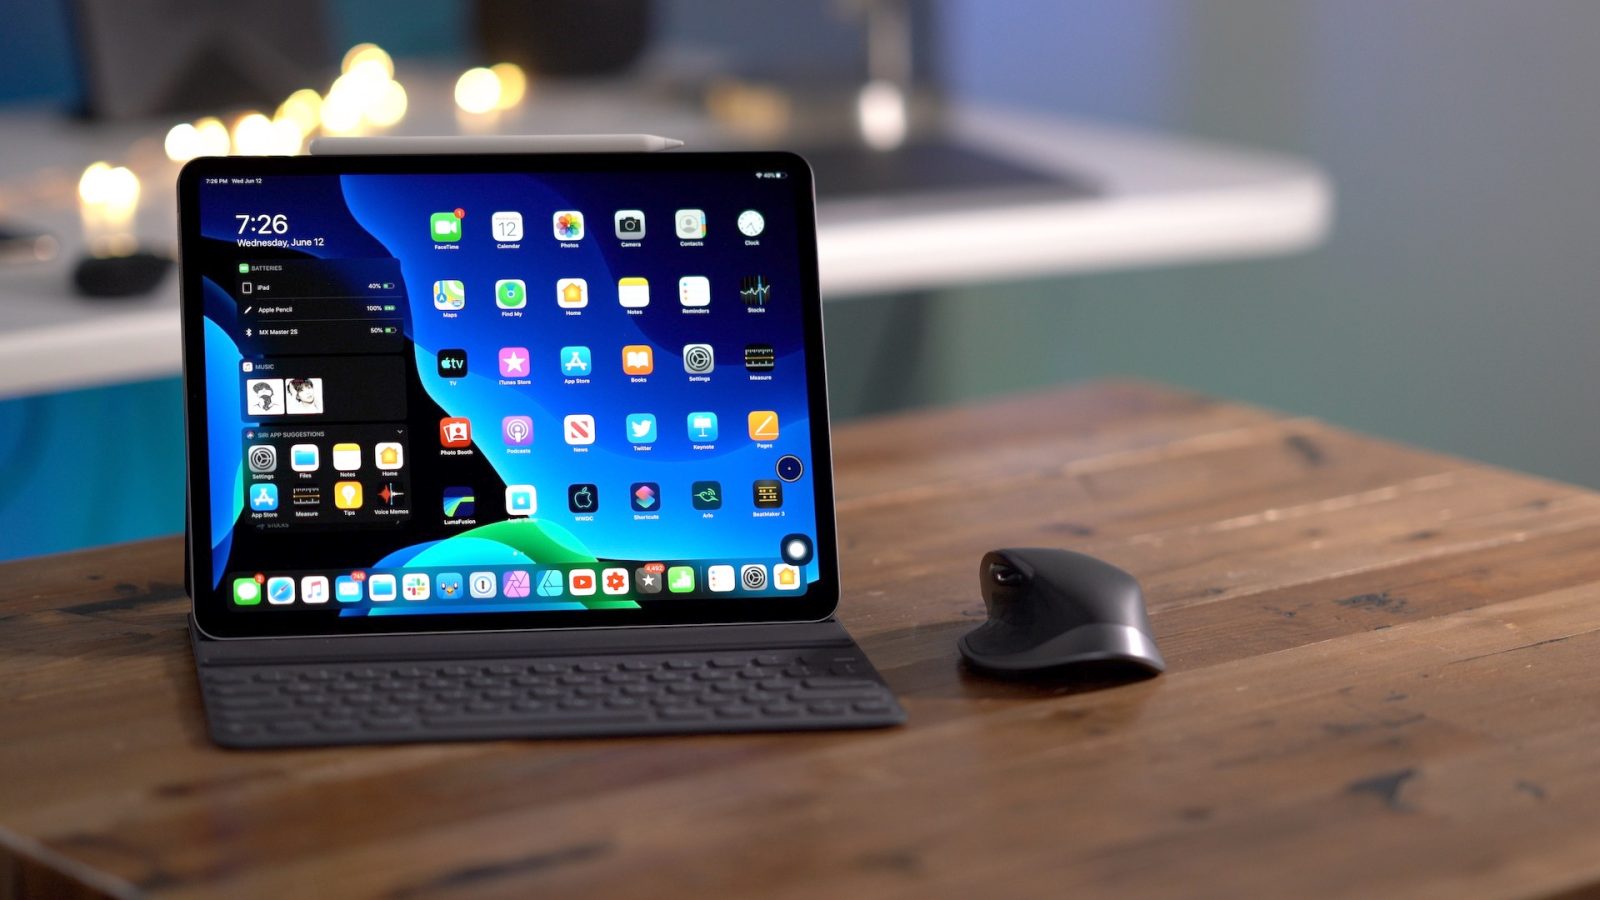 Apple iOS 14 will have Mouse Support